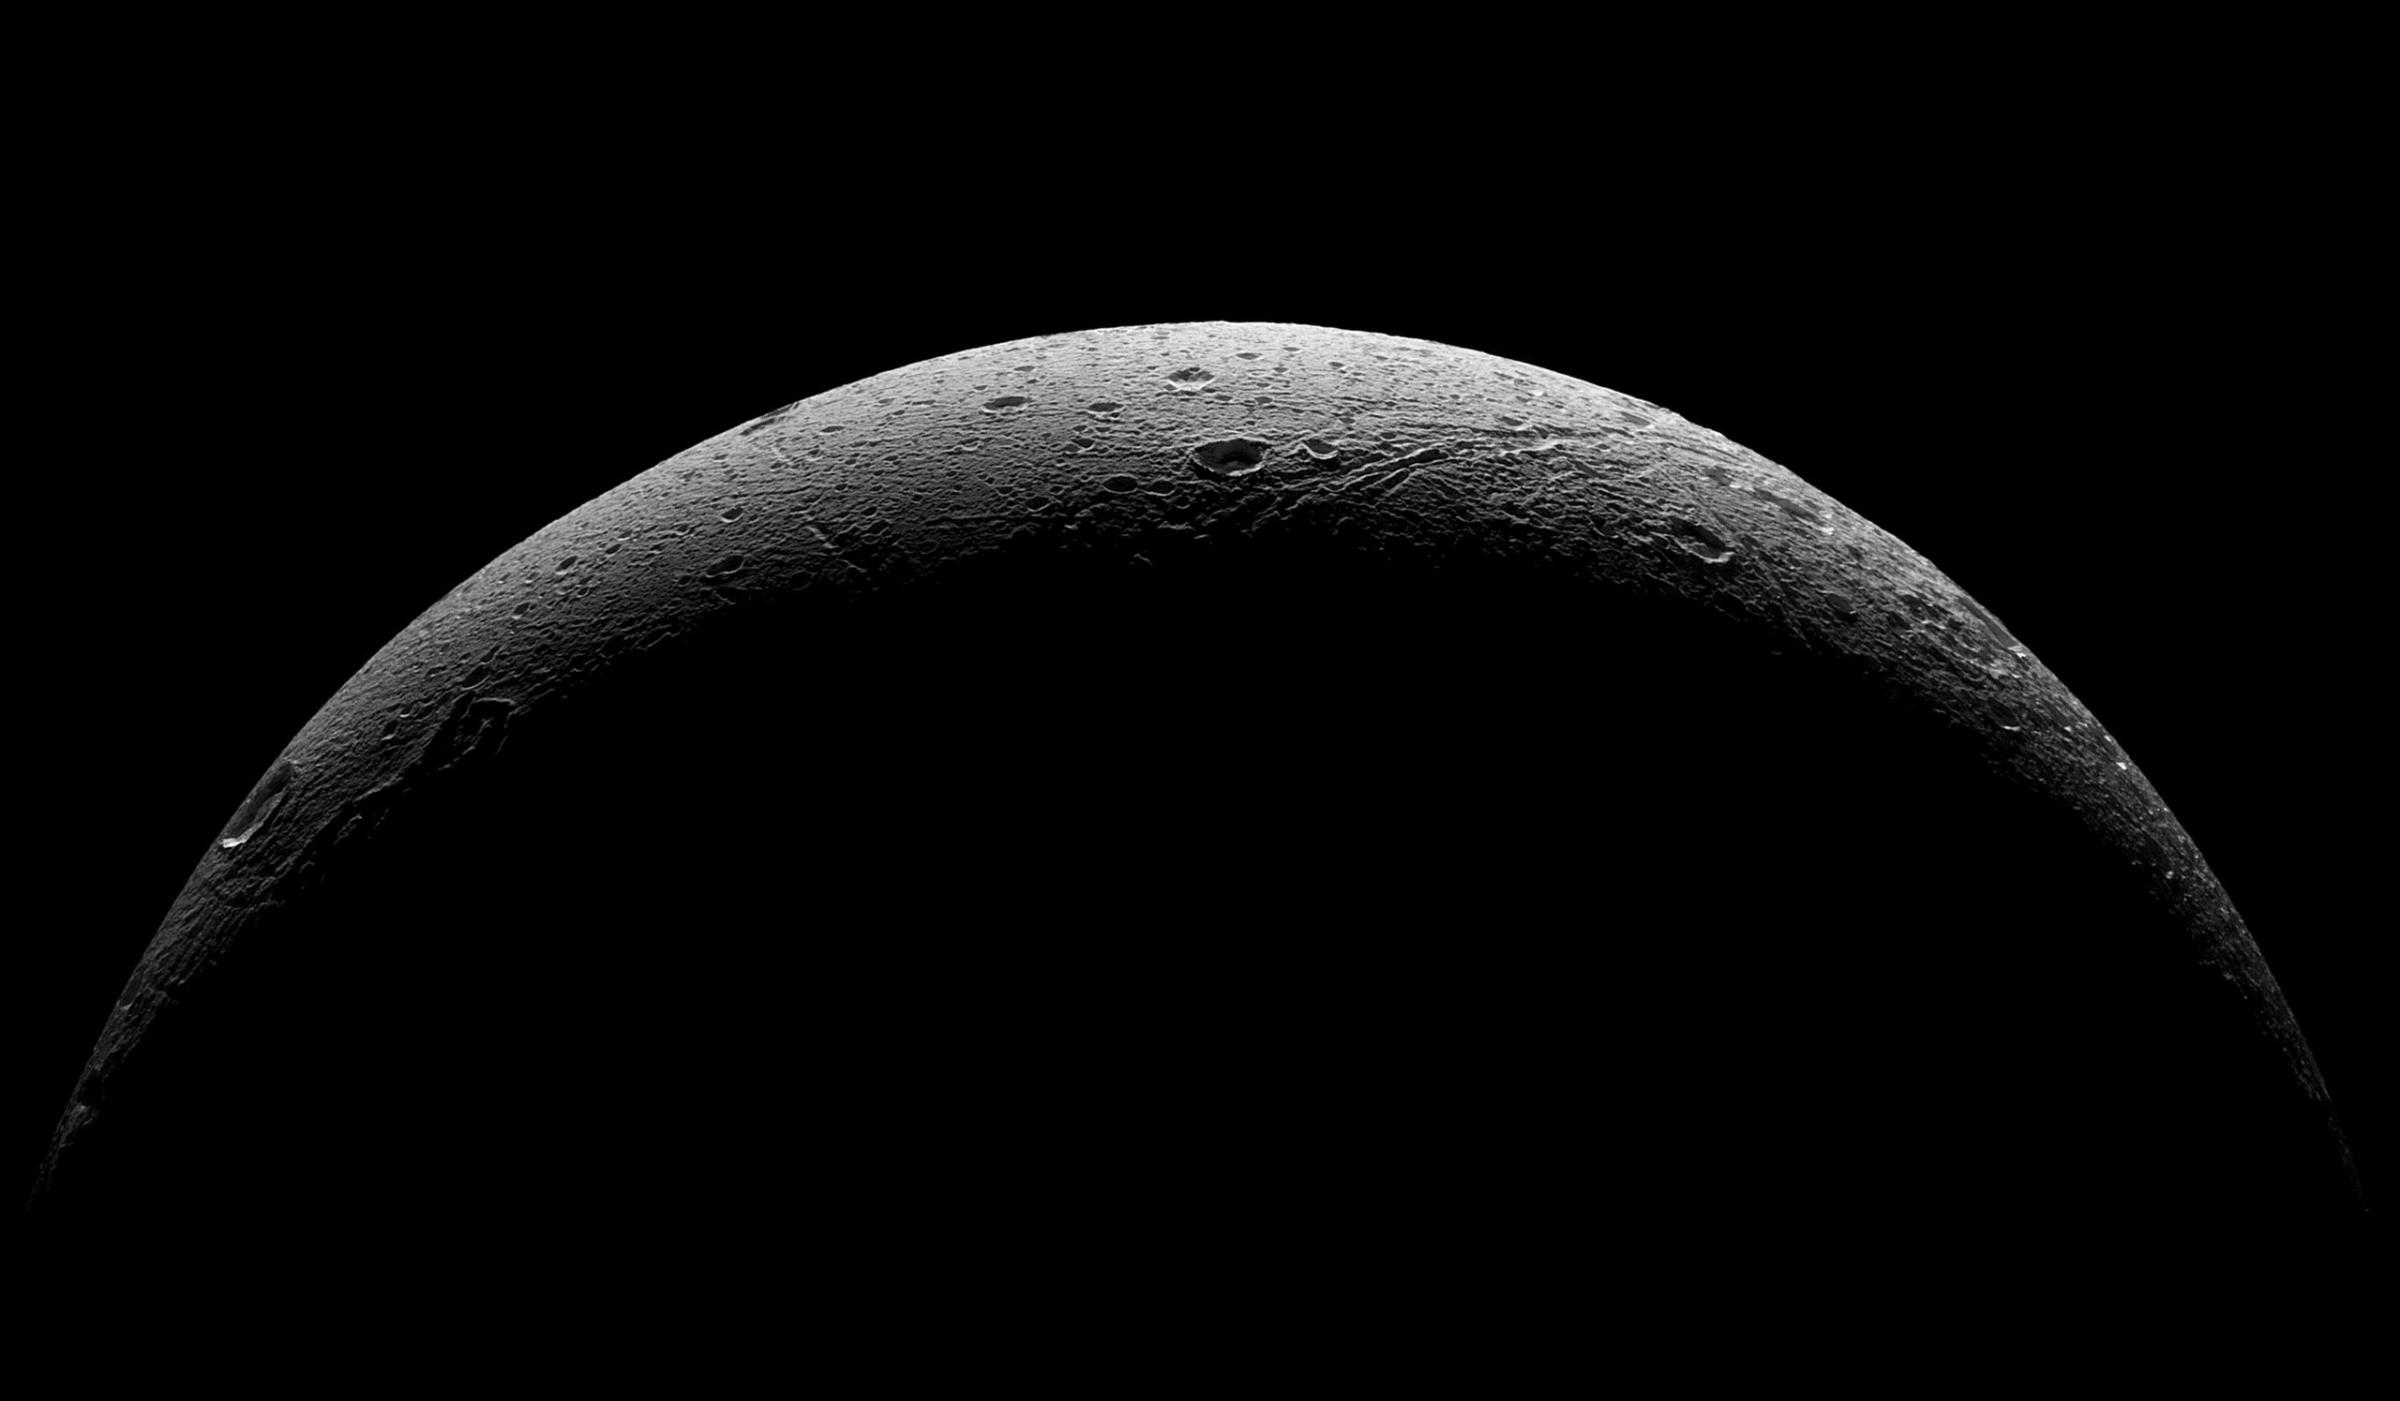 NASA's Cassini spacecraft captured this parting view showing the rough and icy crescent of Saturn's moon Dione following the spacecraft's last close flyby of the moon on Aug. 17, 2015. Five visible light, narrow-angle camera images were combined to create this mosaic view. The view was acquired at distances ranging from approximately 37,000 miles to 47,000 miles from Dione and at a sun-Dione-spacecraft angle of 145 degrees.